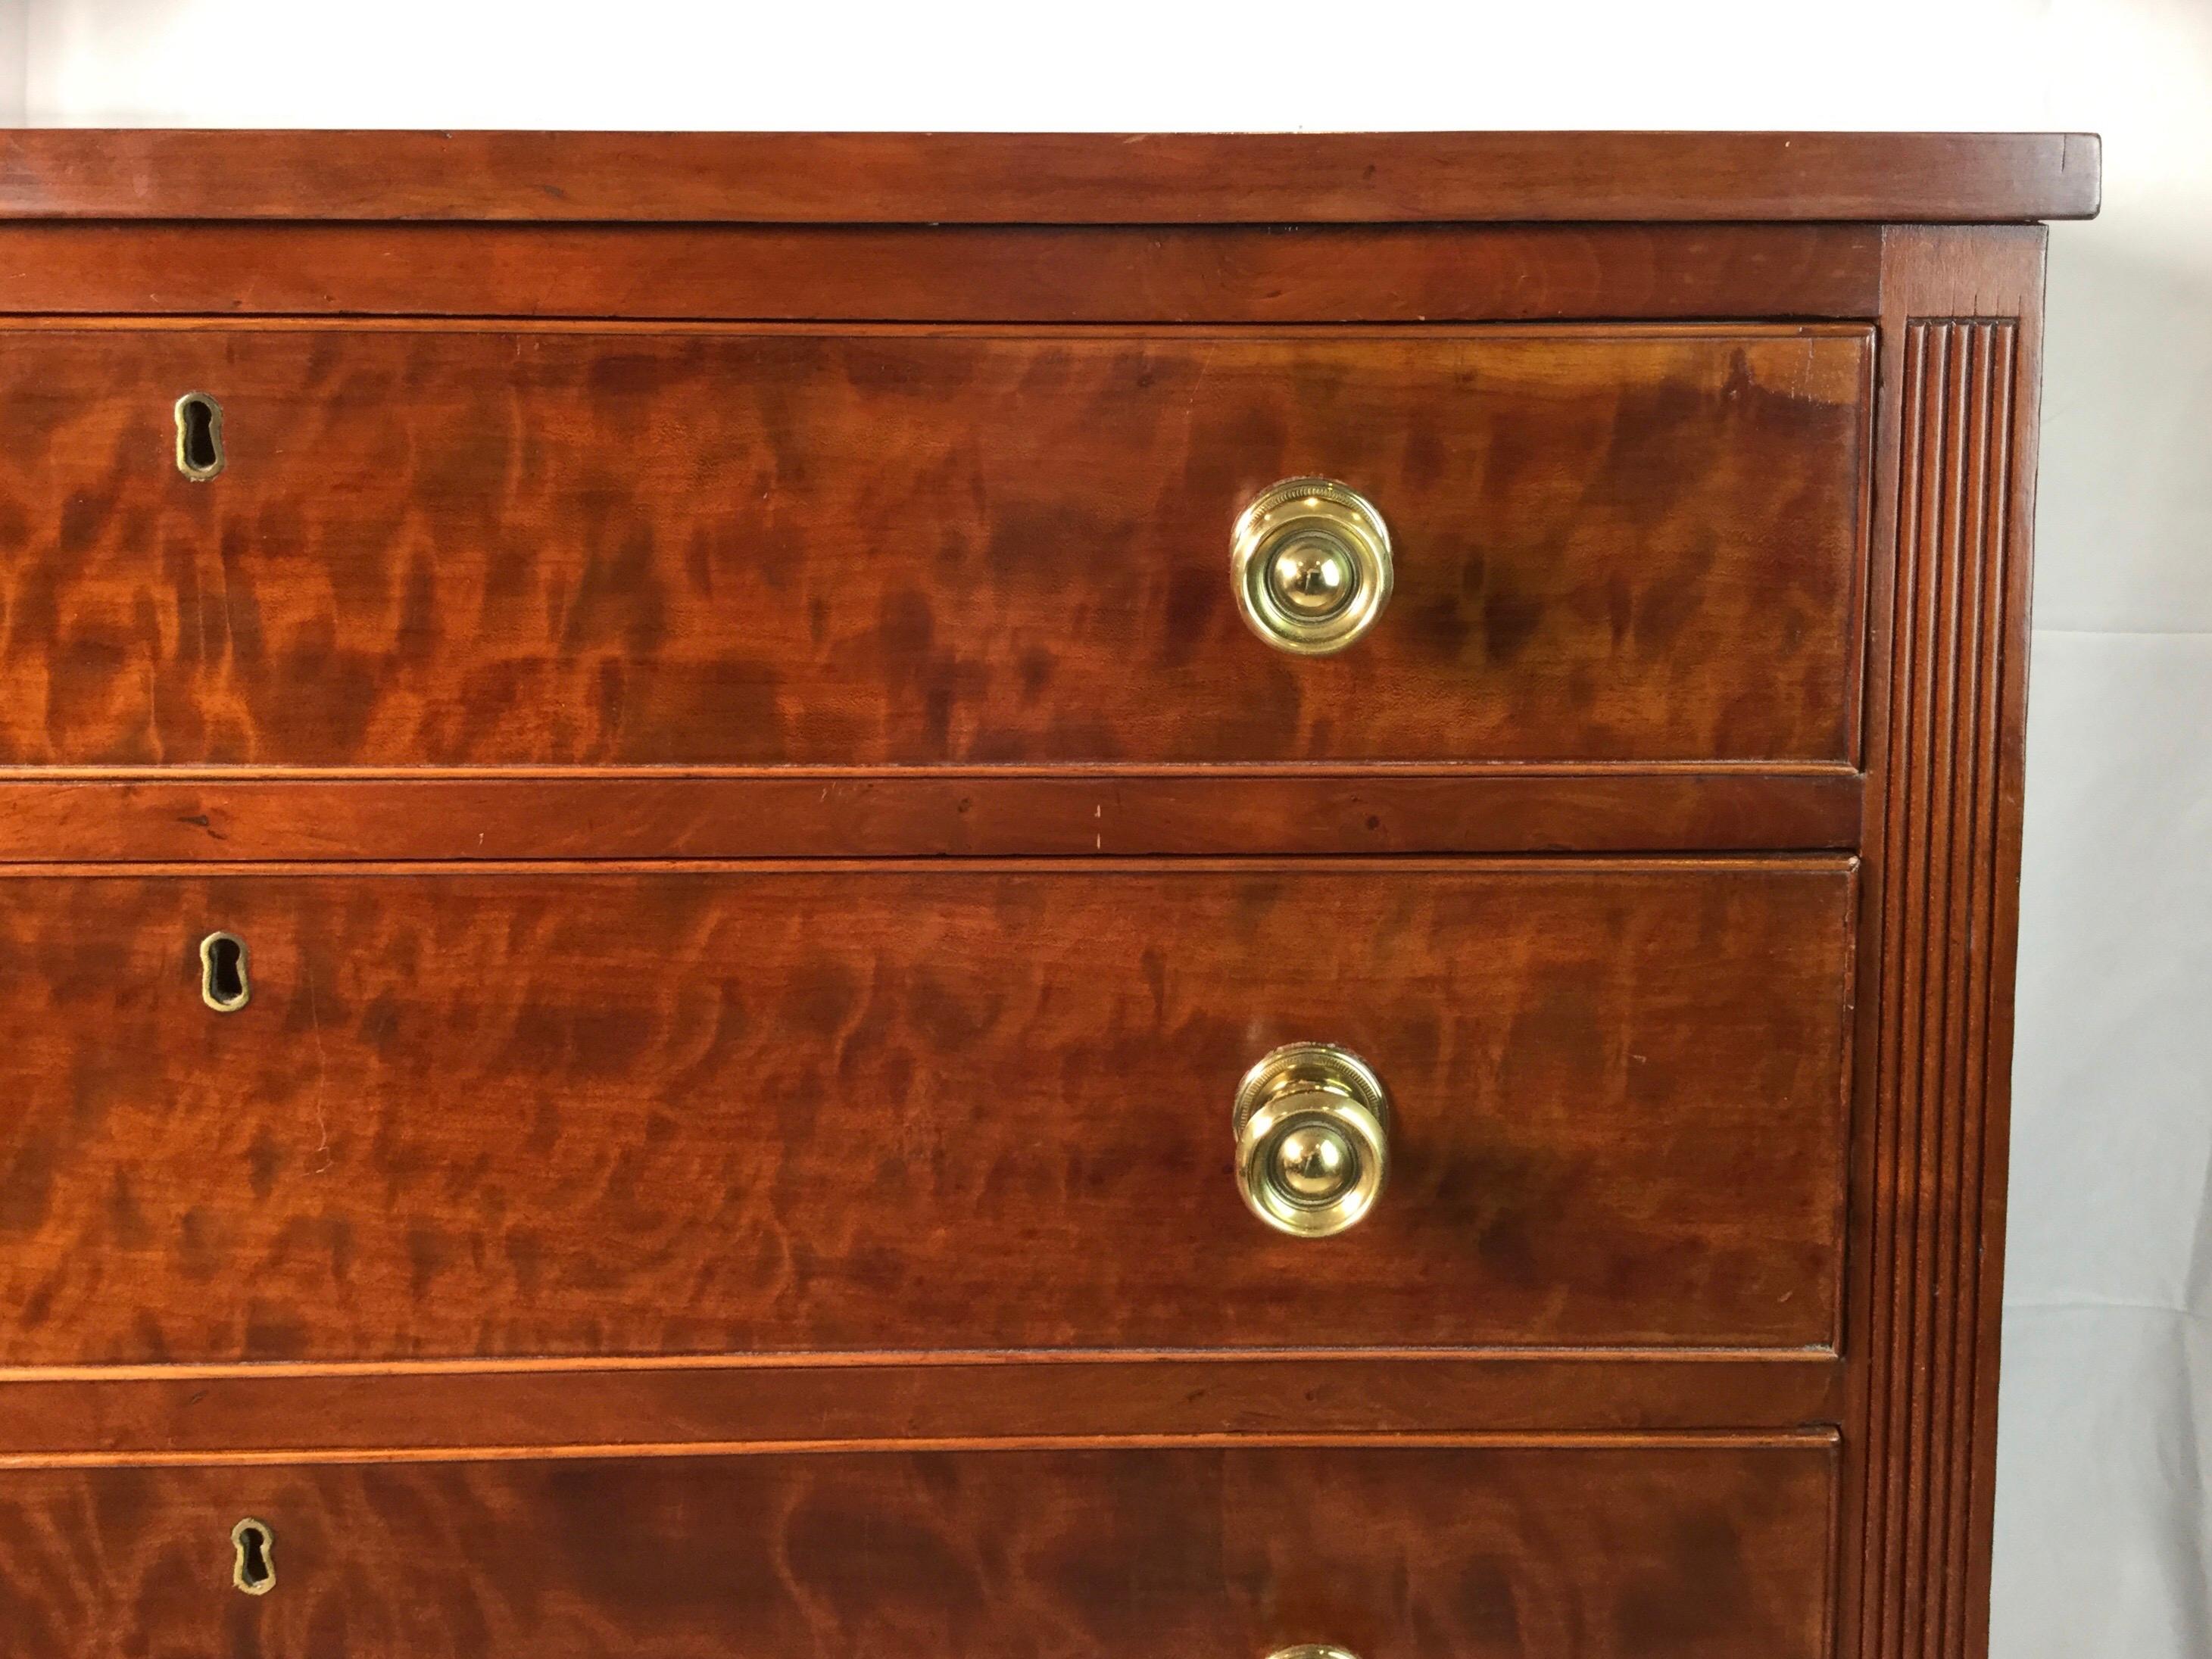 A beautifully figured cherry four-drawer chest with brass hardware. The chest with reeded posts resting on turned legs, American, circa 1810.